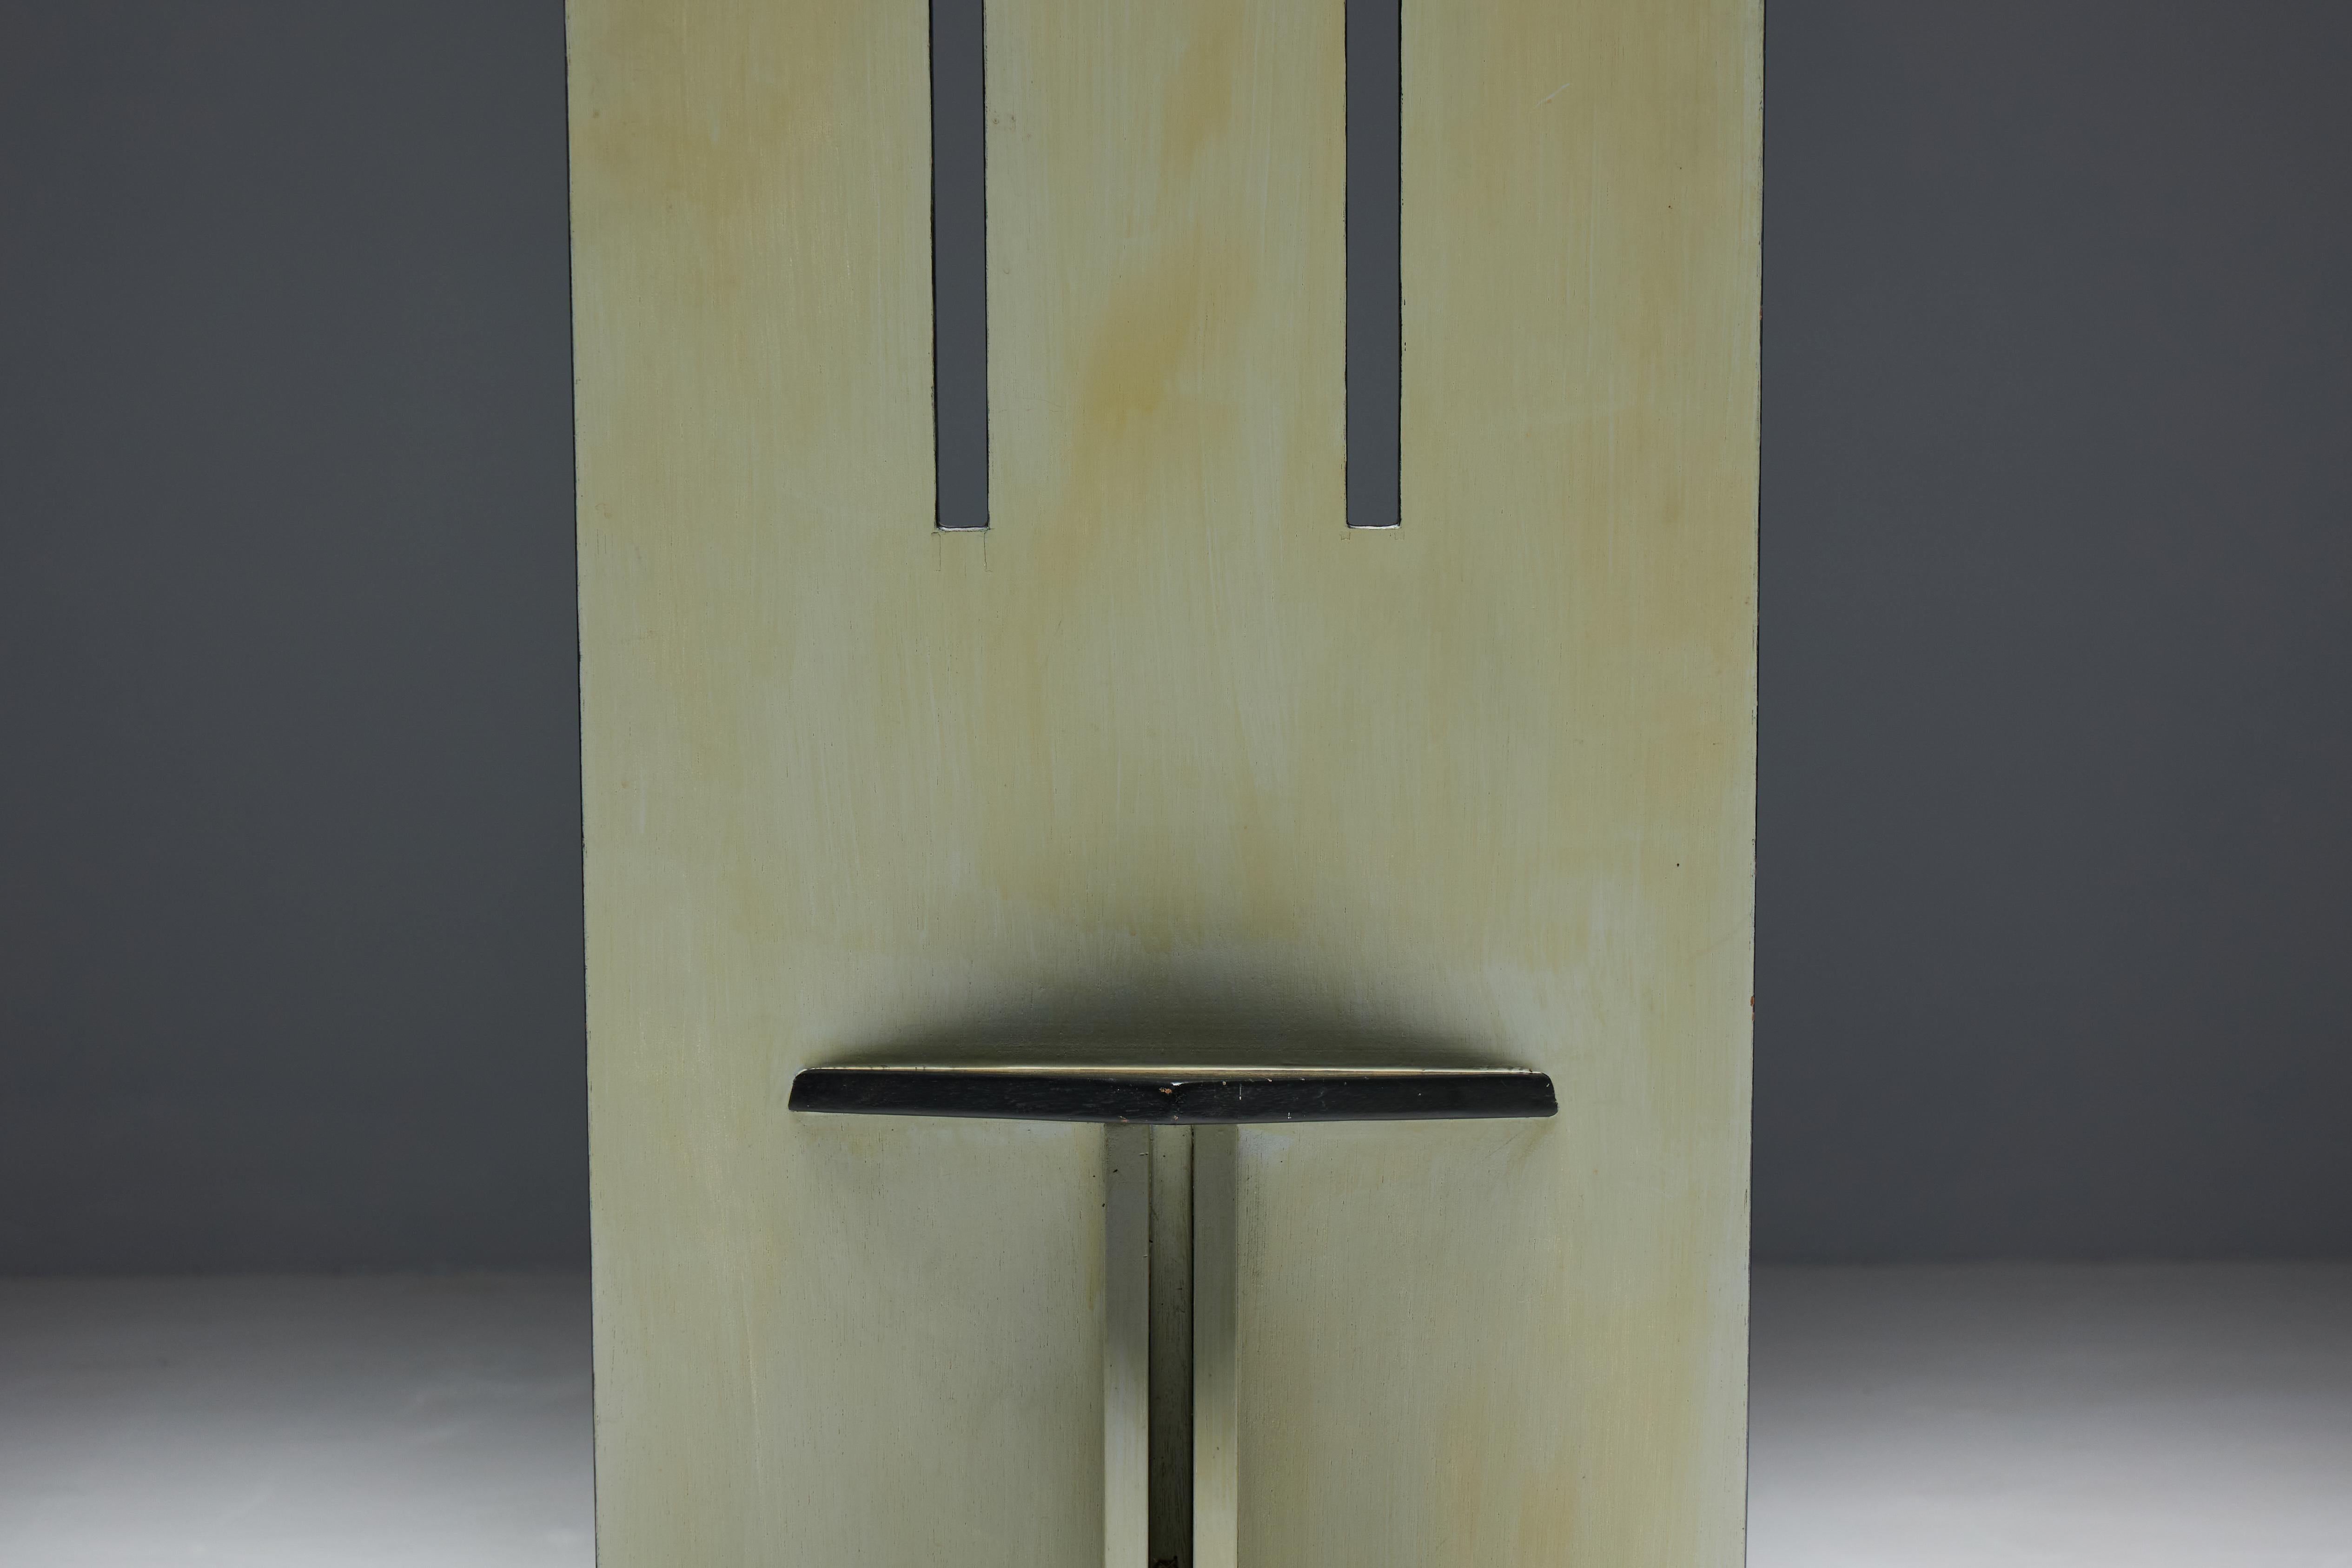 Dining Chairs in the style of De Stijl Movement, Netherlands, 1950s For Sale 7